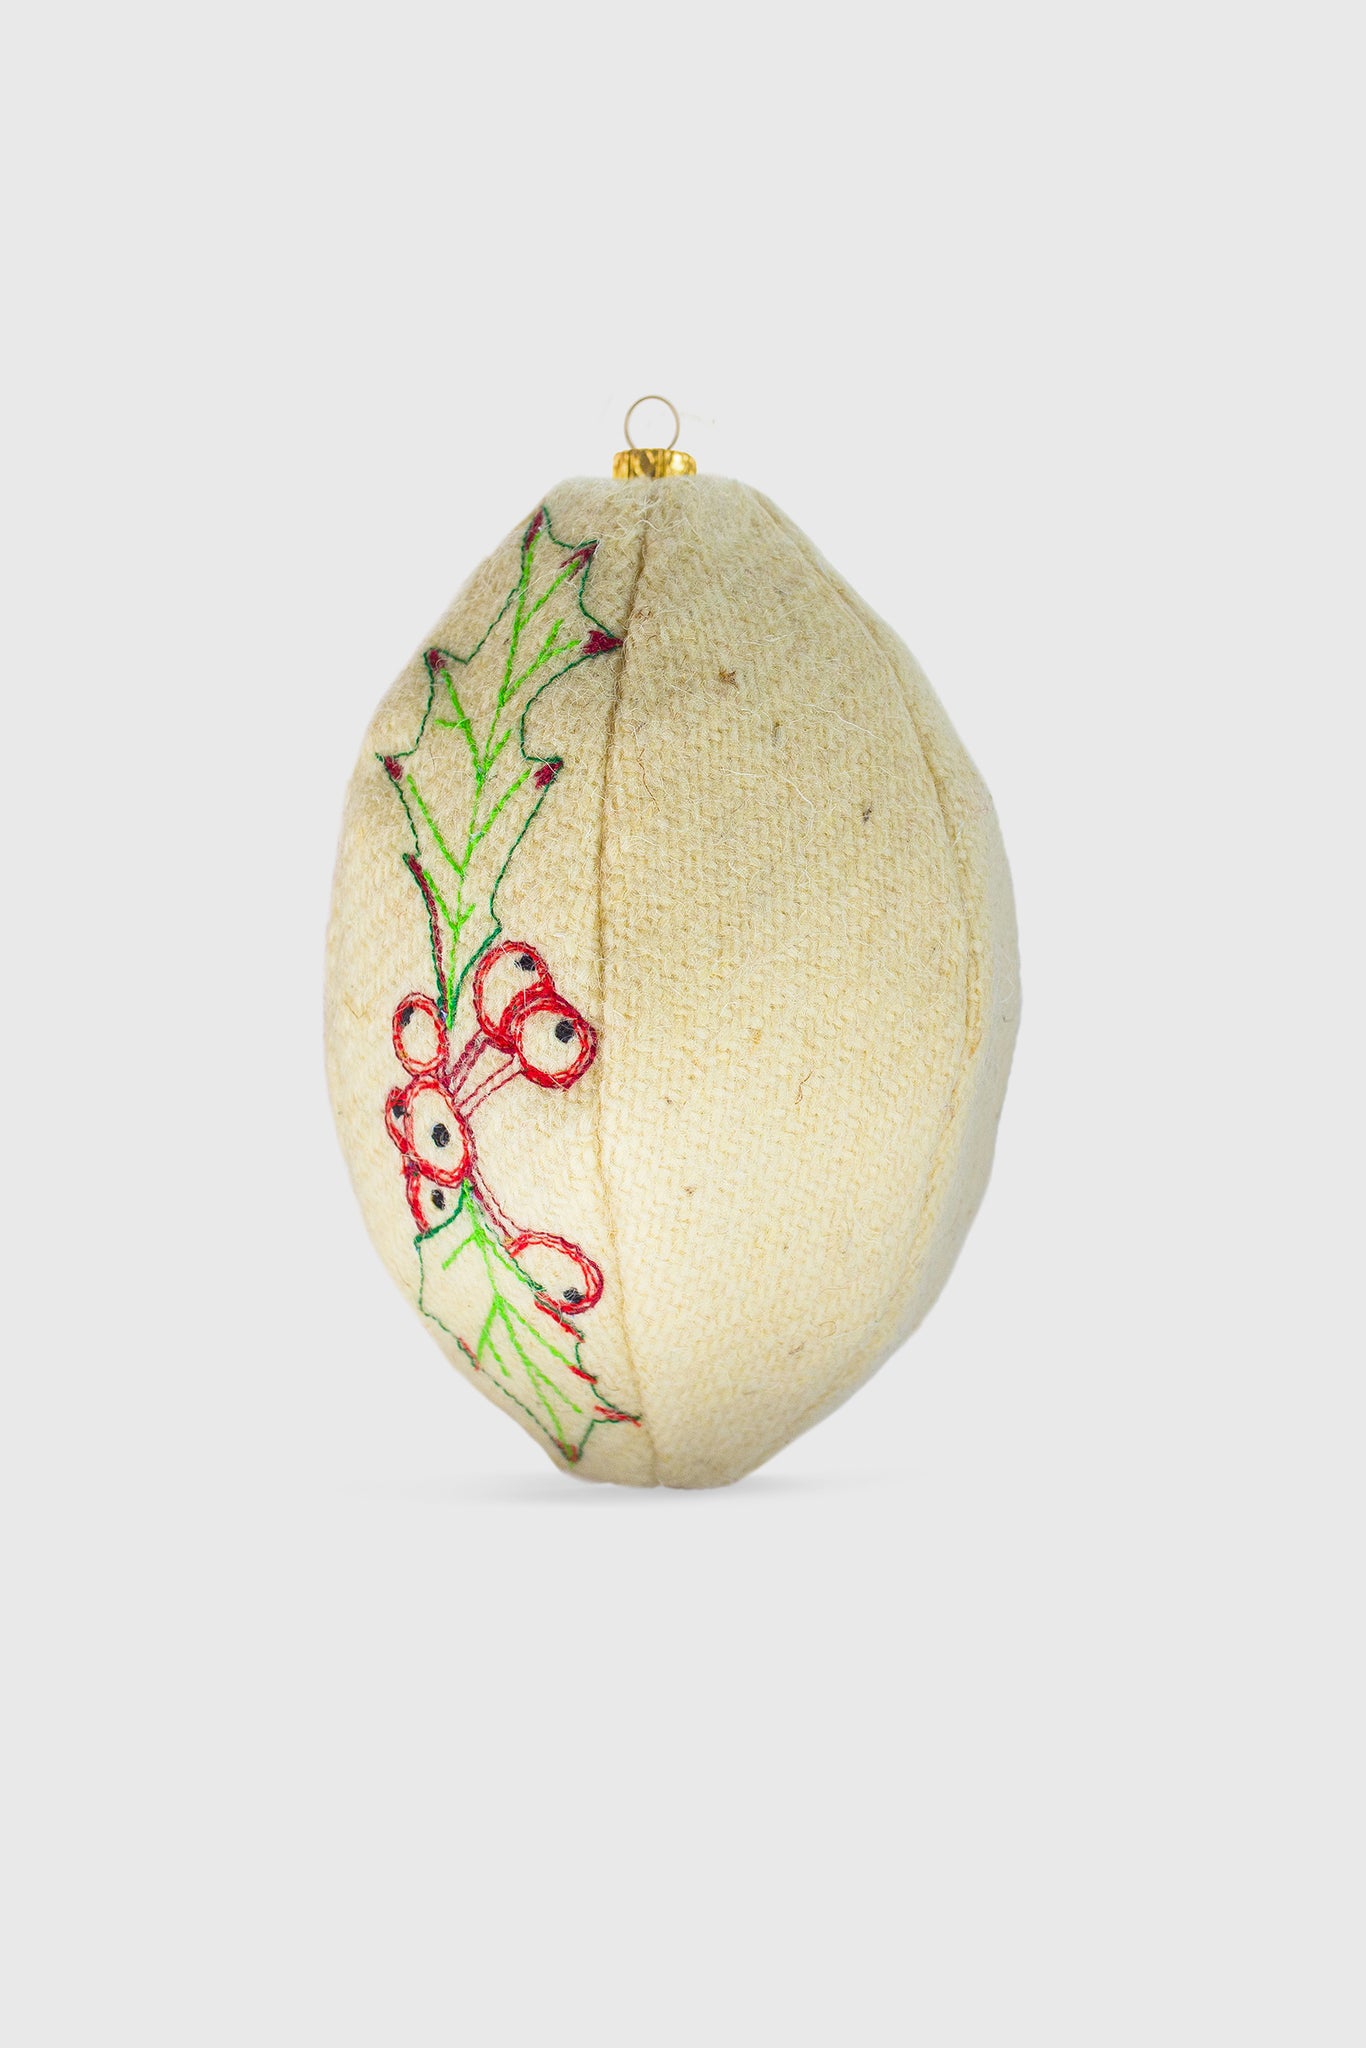 Ruxandra Christmas decorations, globe embroidered with Christmas holly, picture perfect, friendly, modern traditional ornament, soft wool, white, holiday's object, hand on tree